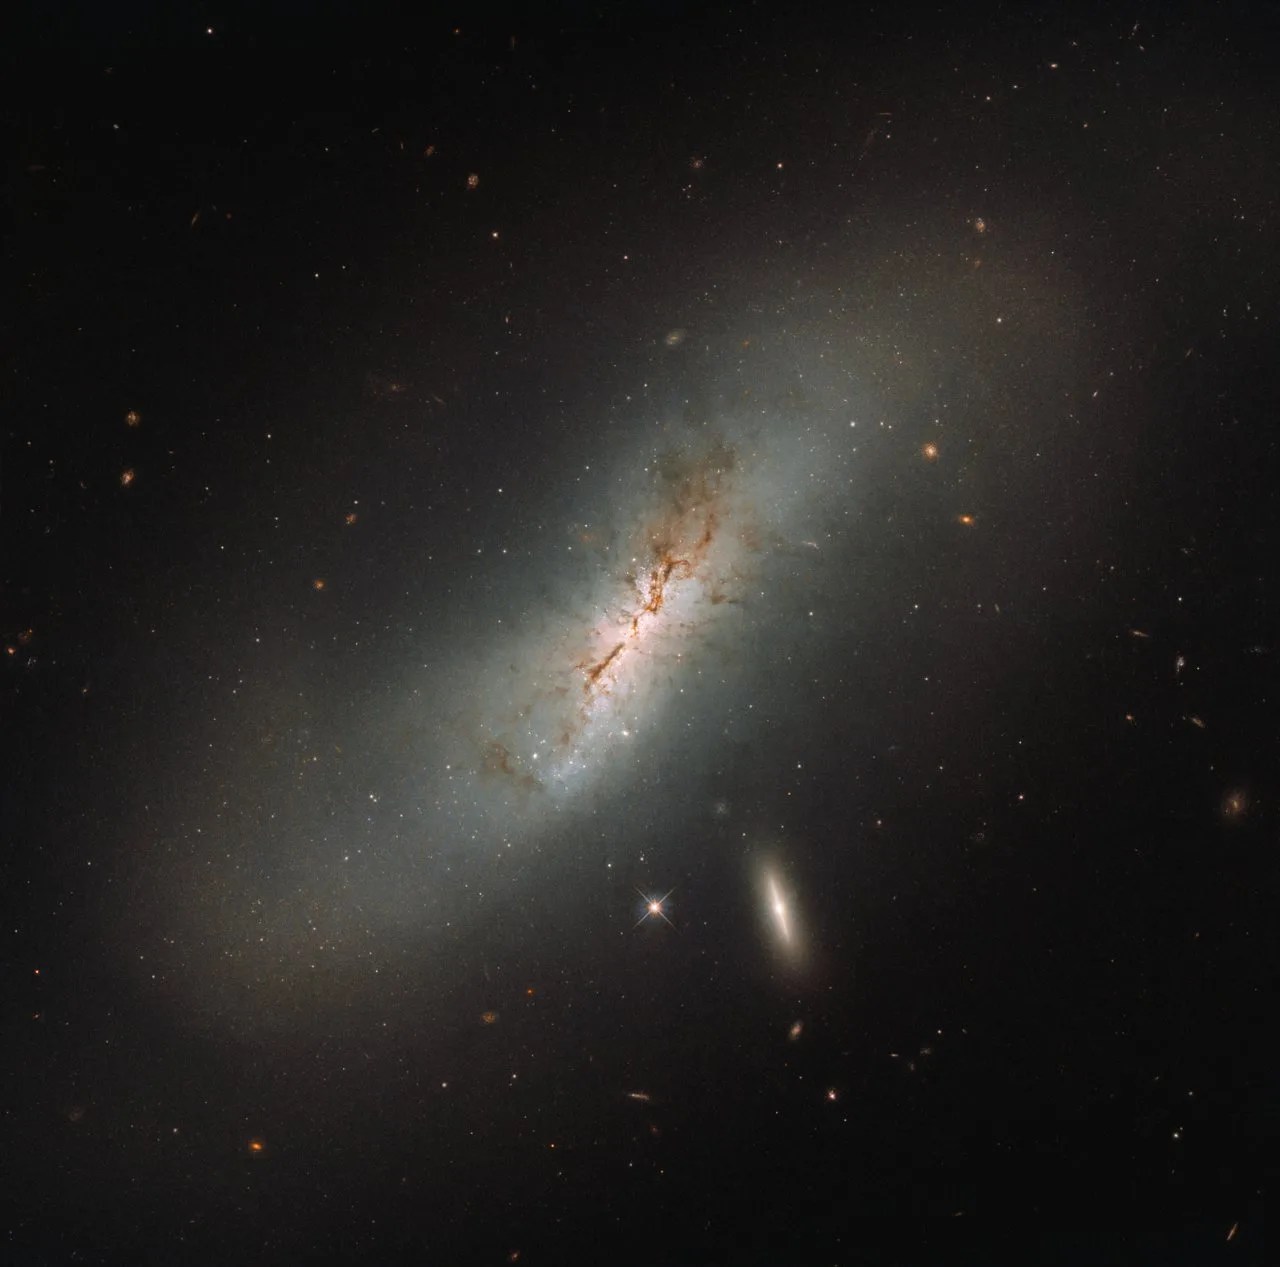 Large diffuse galaxy with smaller galaxies nearby